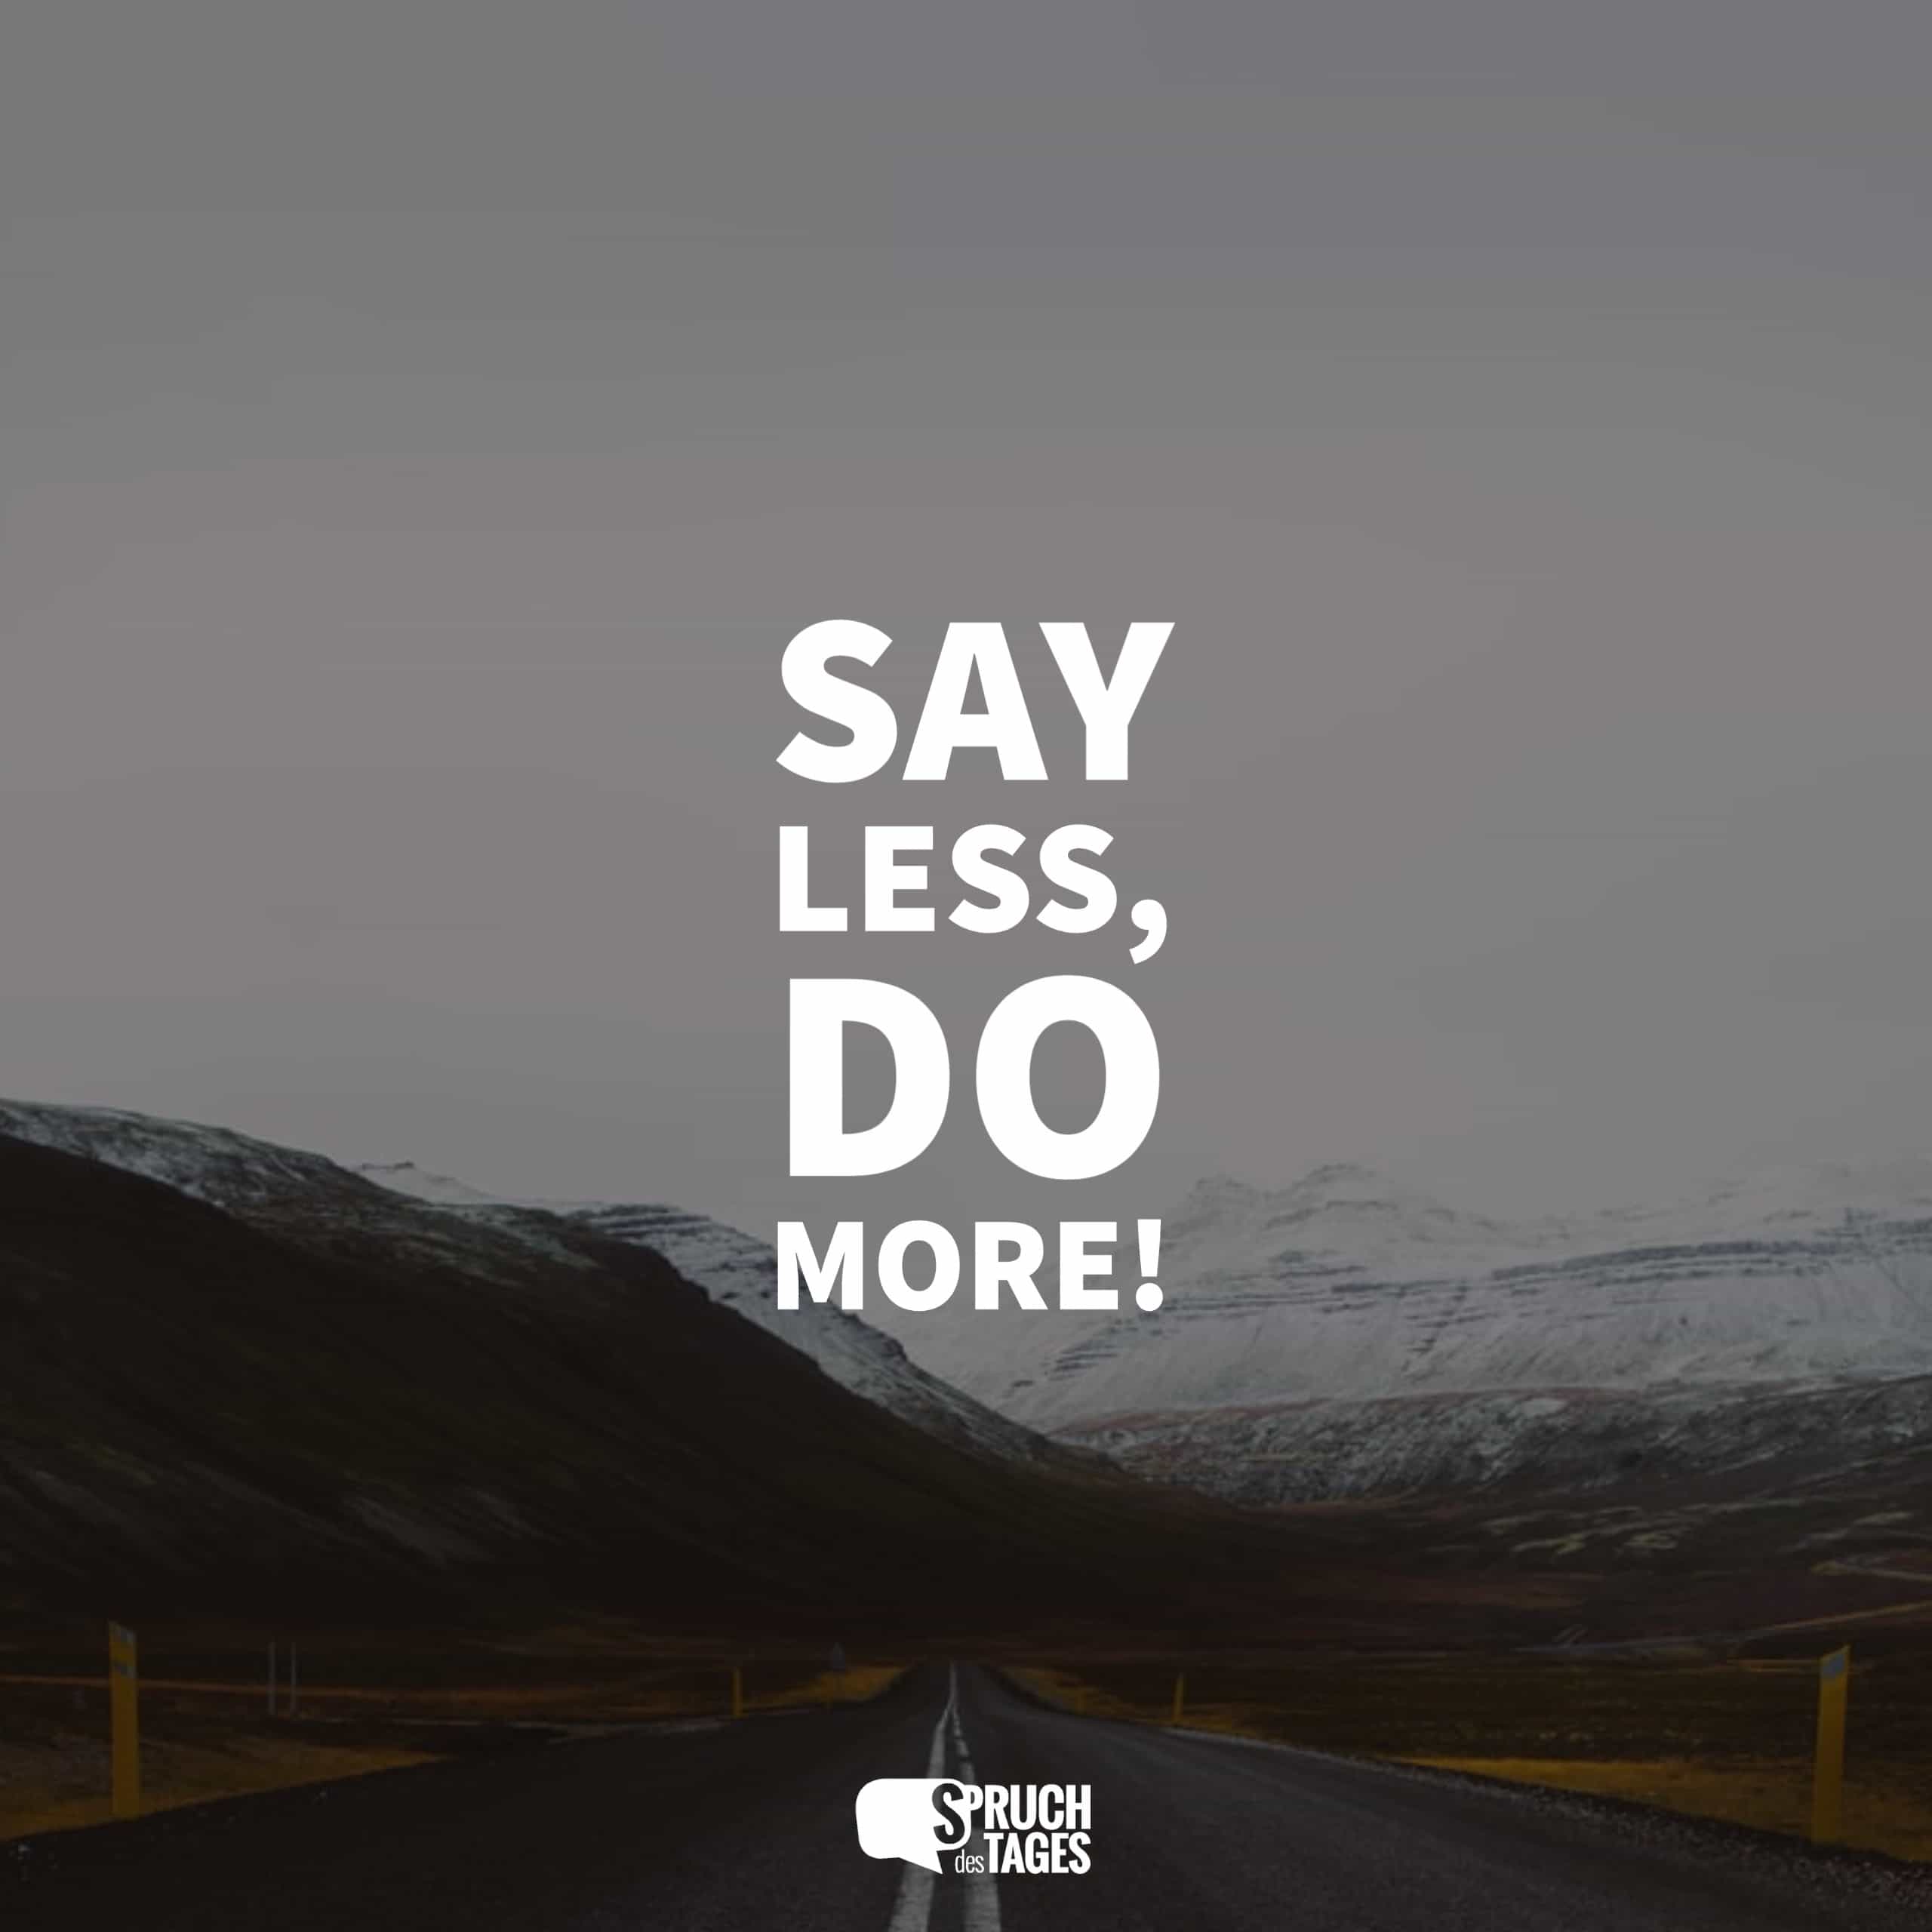 Say less, do more!